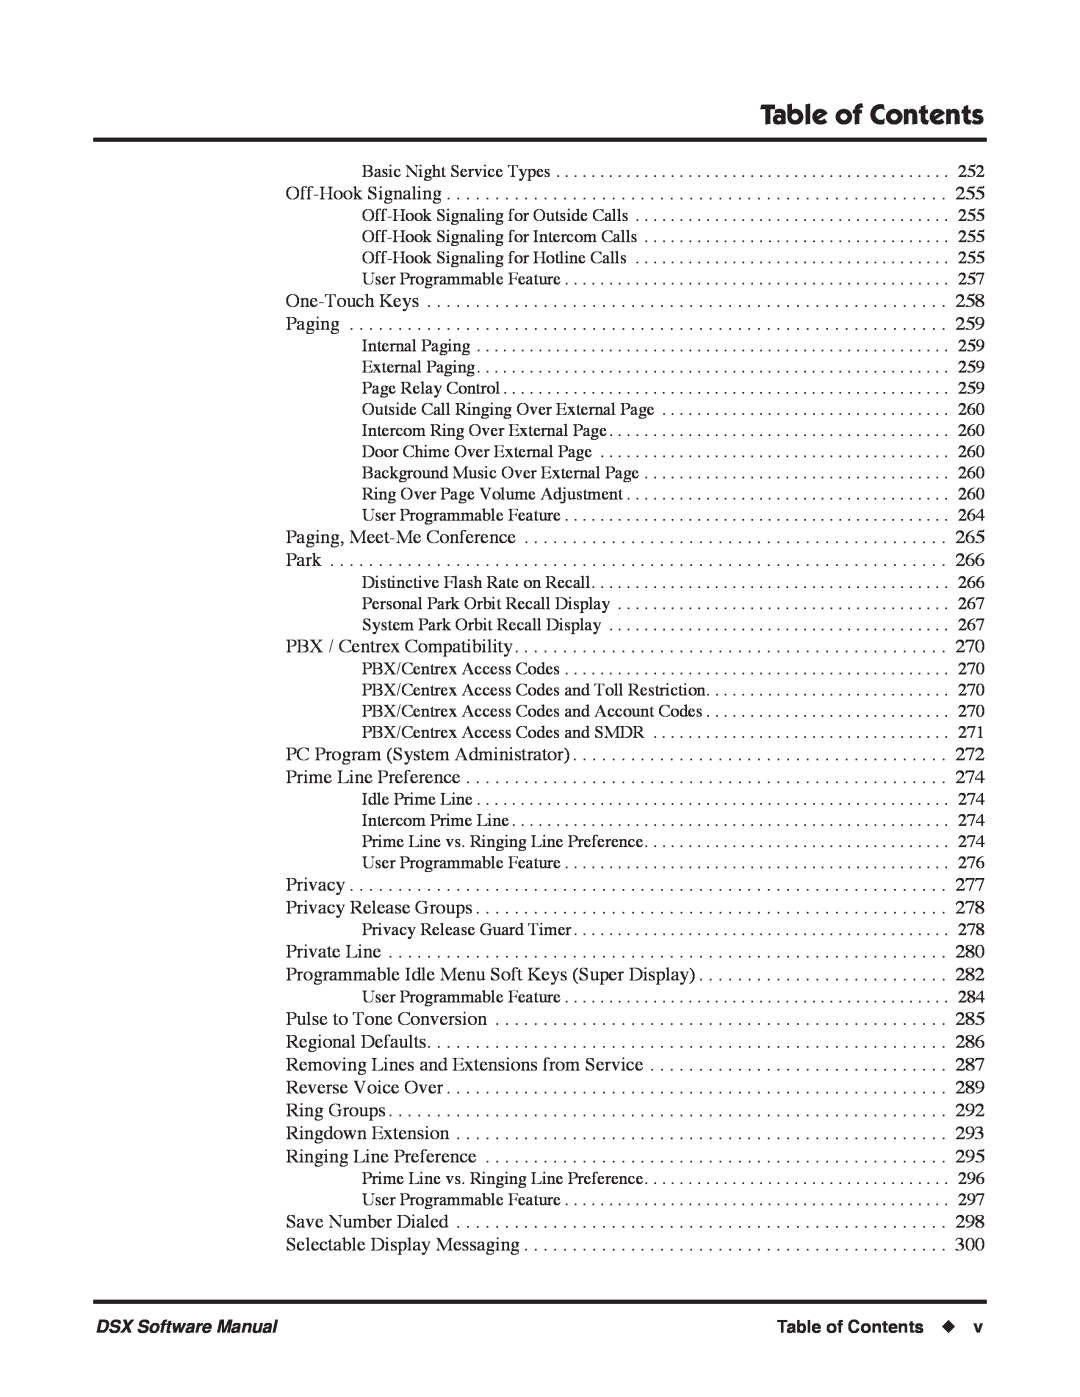 NEC P, N 1093100 software manual Table of Contents, Off-HookSignaling 